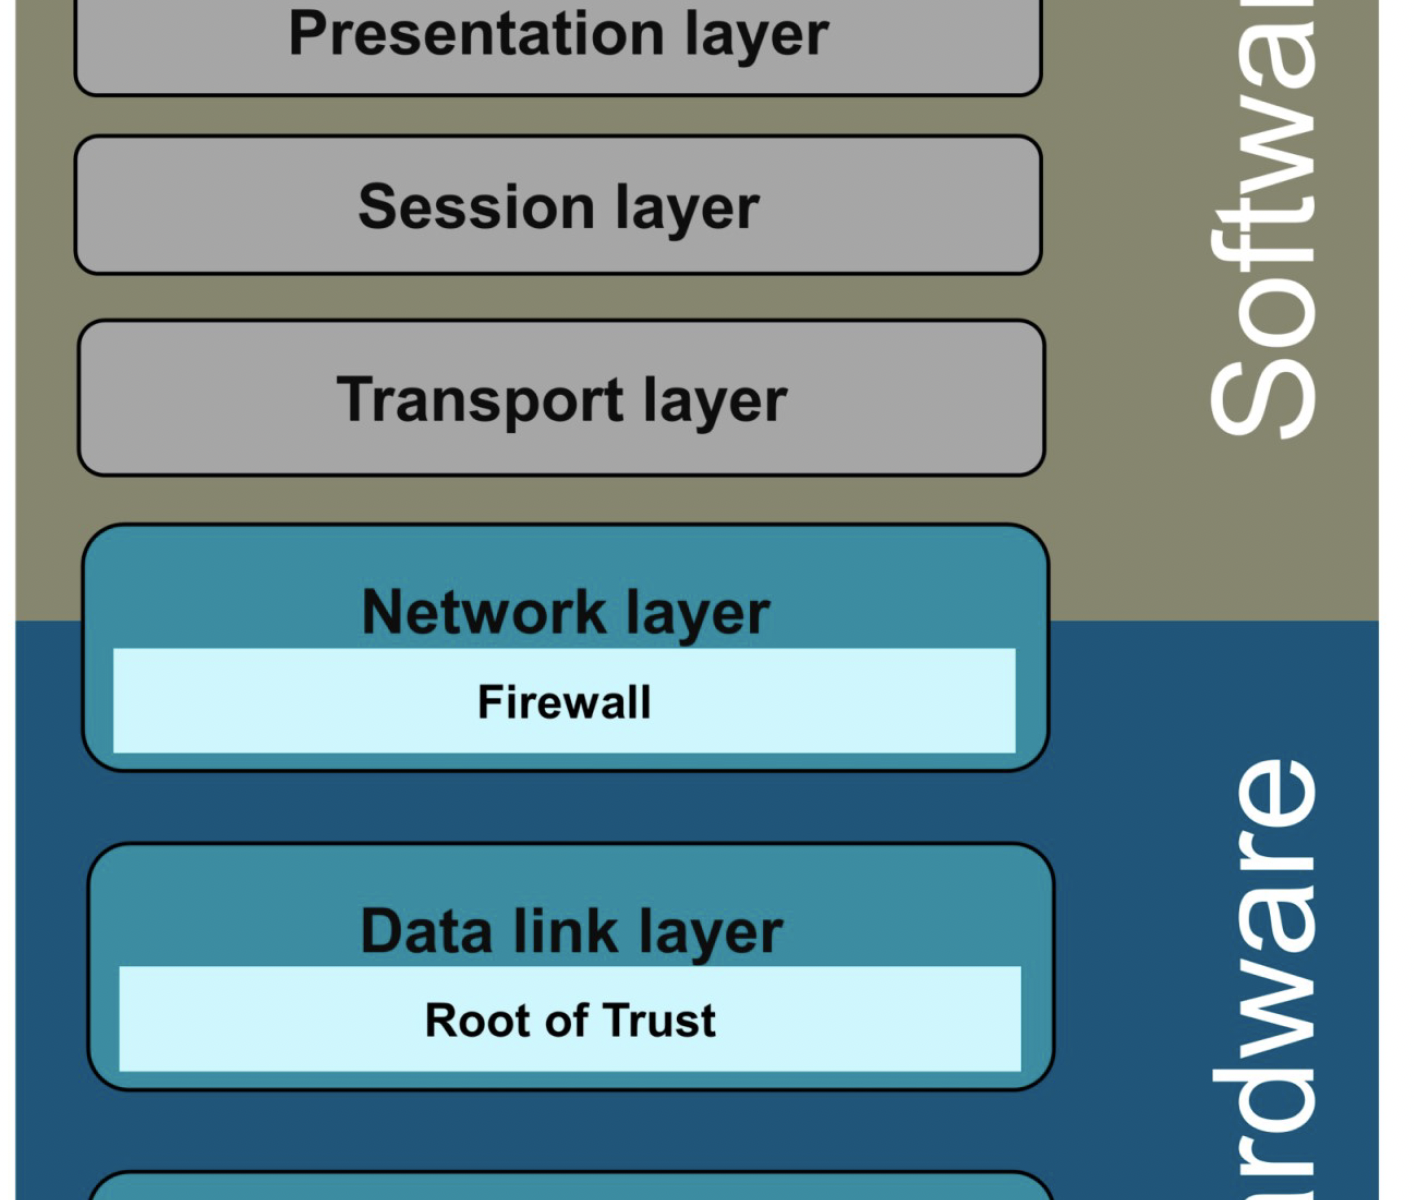 OSI Seven layer model for securing network communication